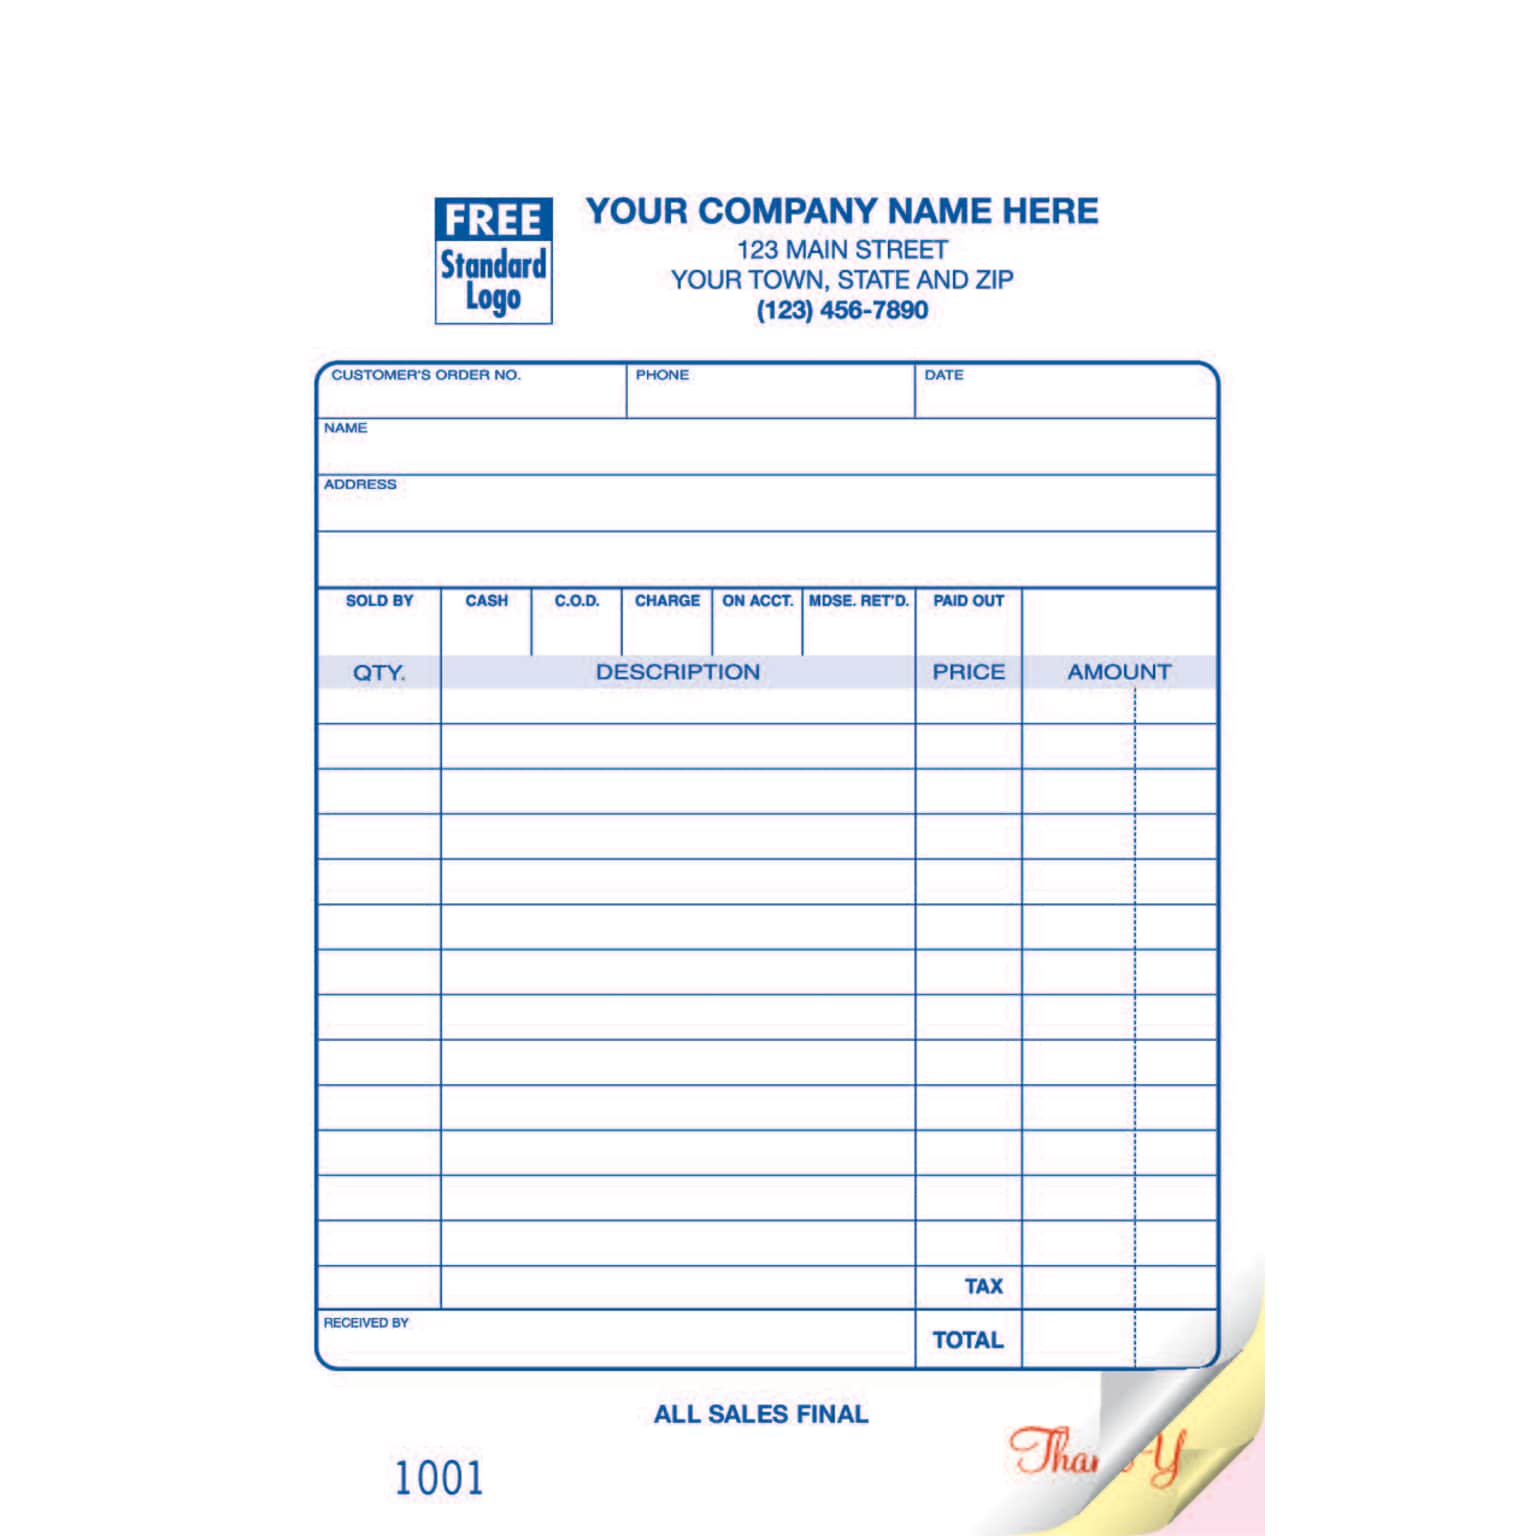 Custom Register Form, Classic Design, Large Format, ALL SALES FINAL, 2 Parts, 1 Color Printing, 5 1/2 x 8 1/2, 500/Pack